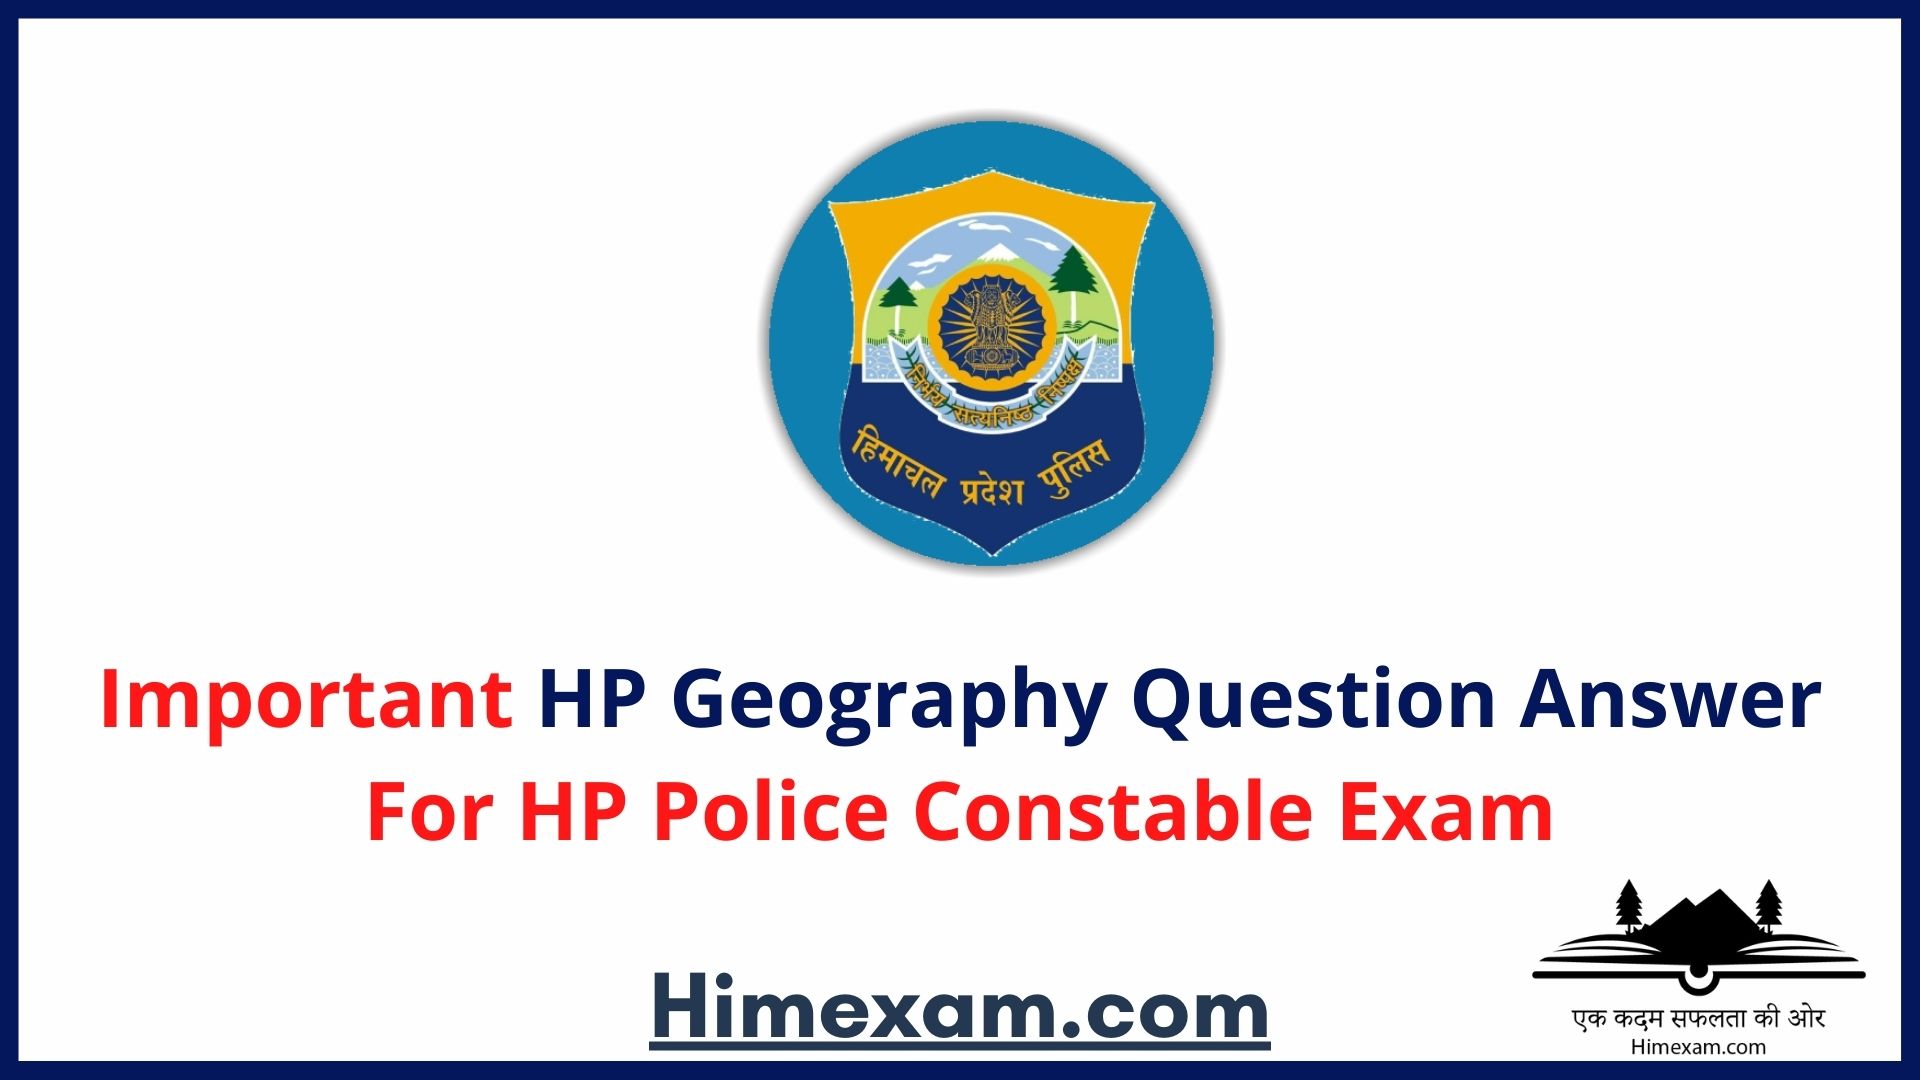 Important HP Geography Question Answer For HP Police Constable Exam